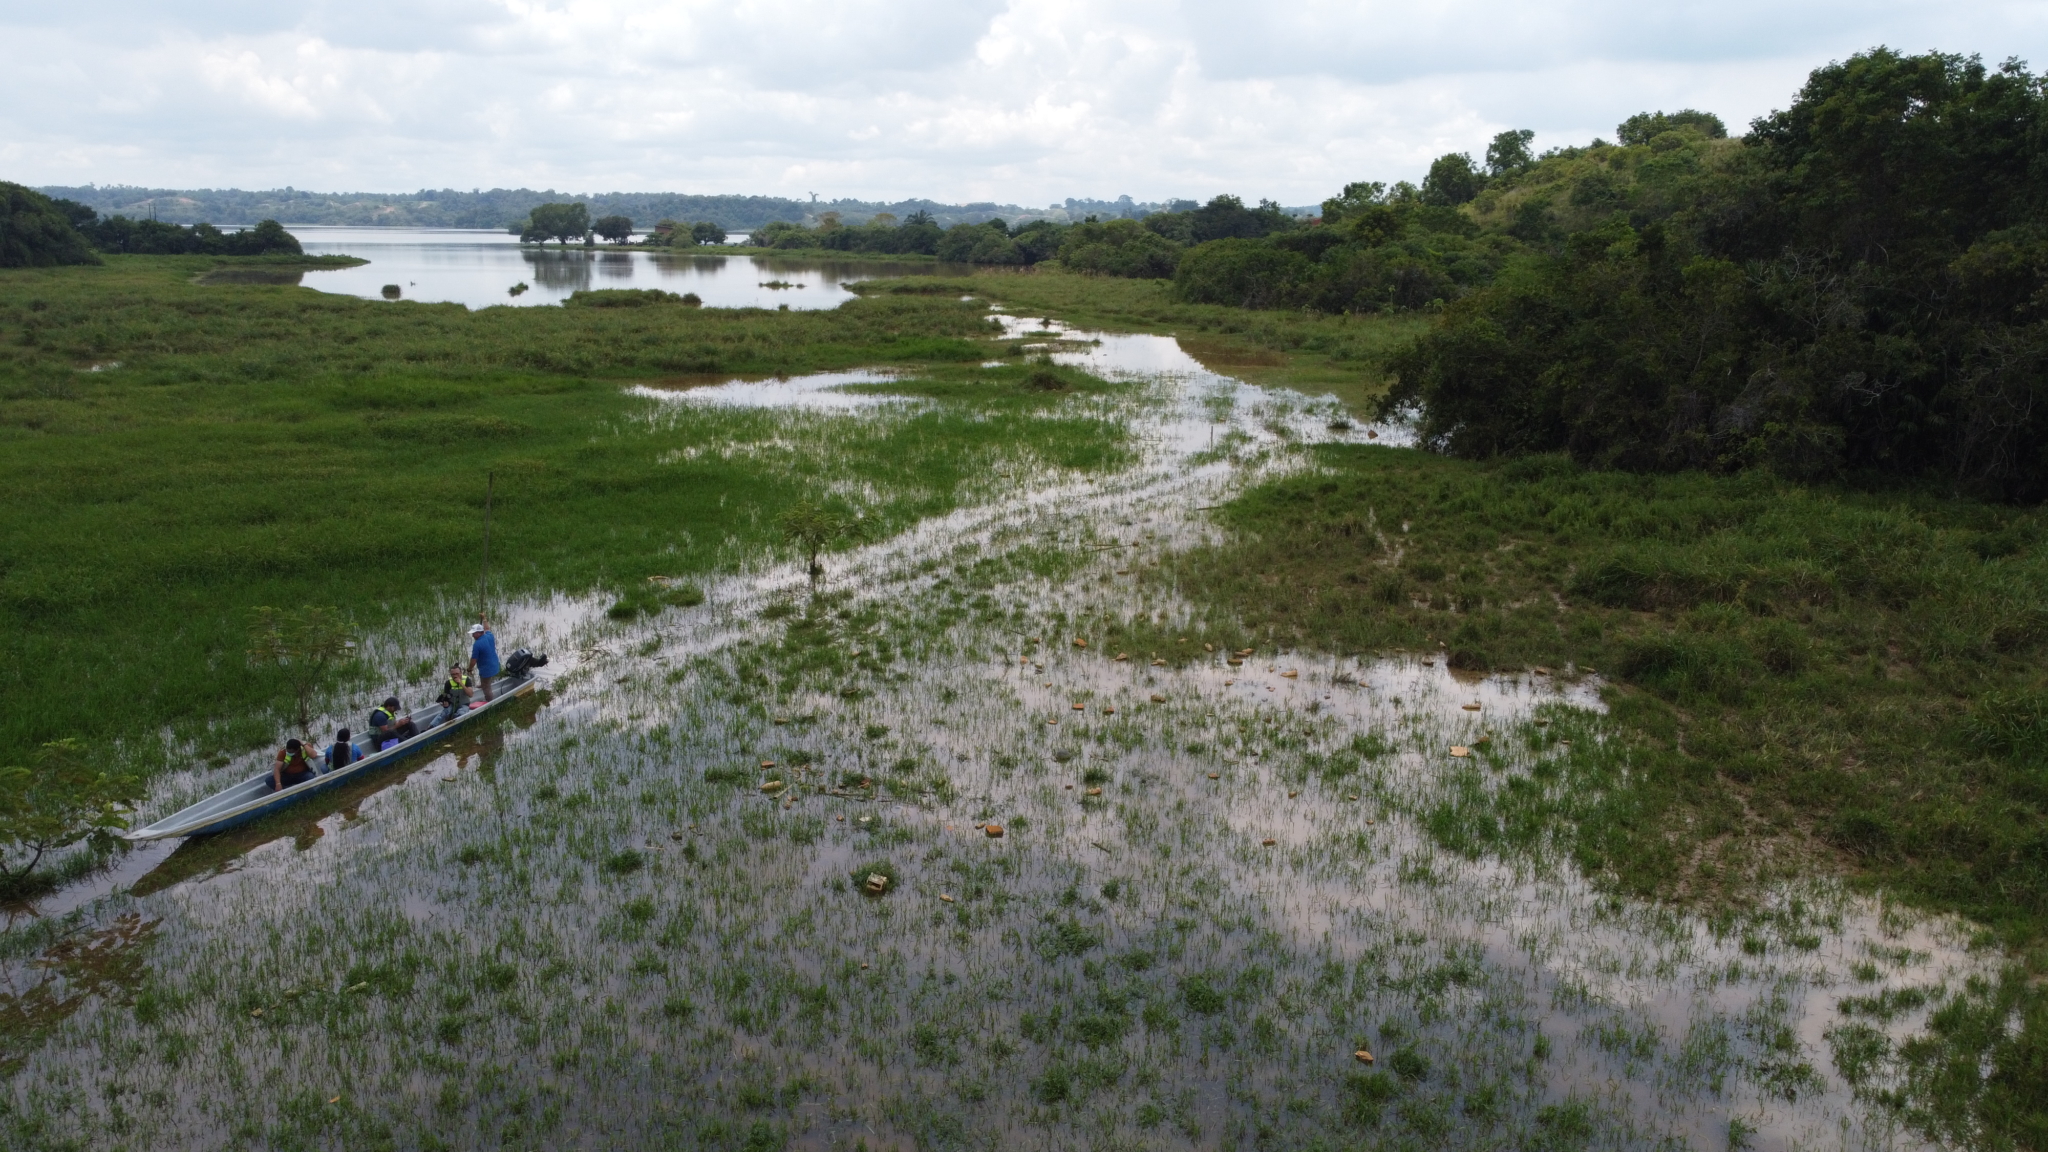 Yuly travels through threatened wetlands